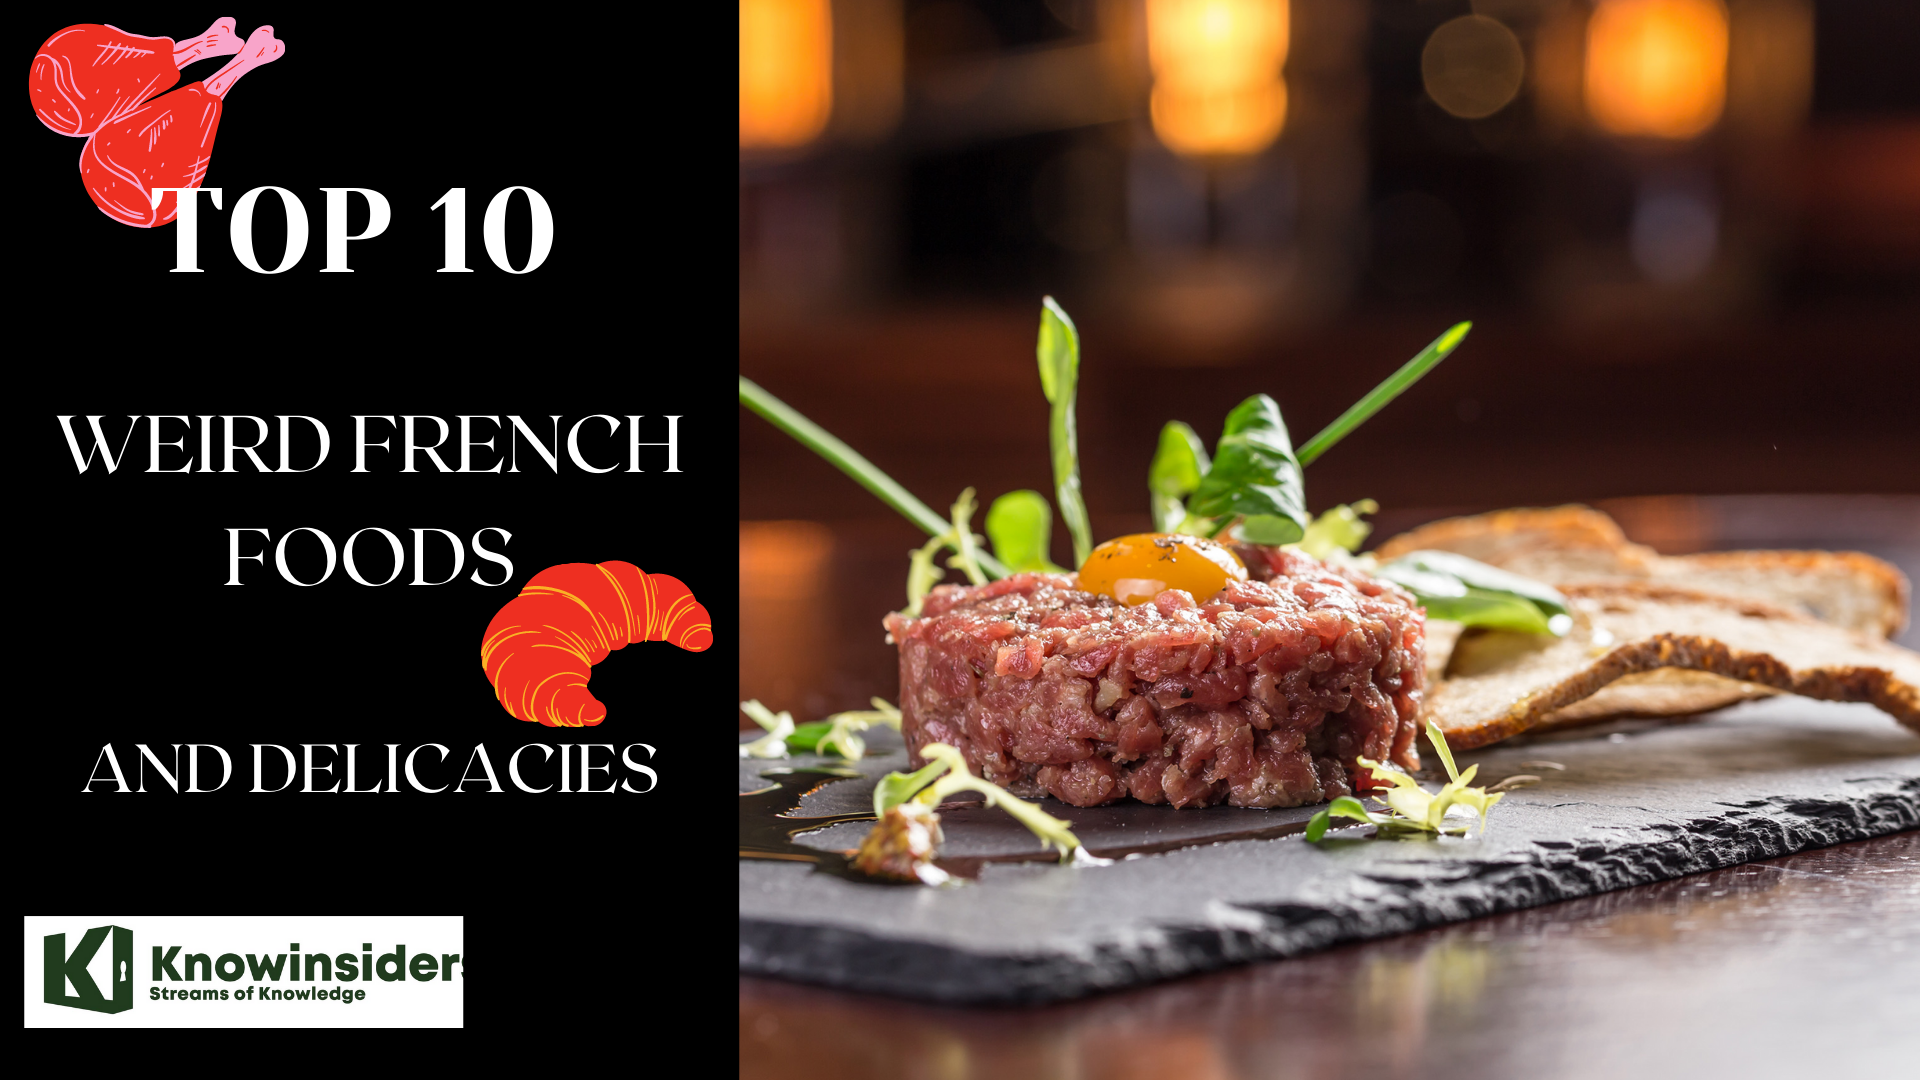 Top 11 French Foods -Weird & Delicacies